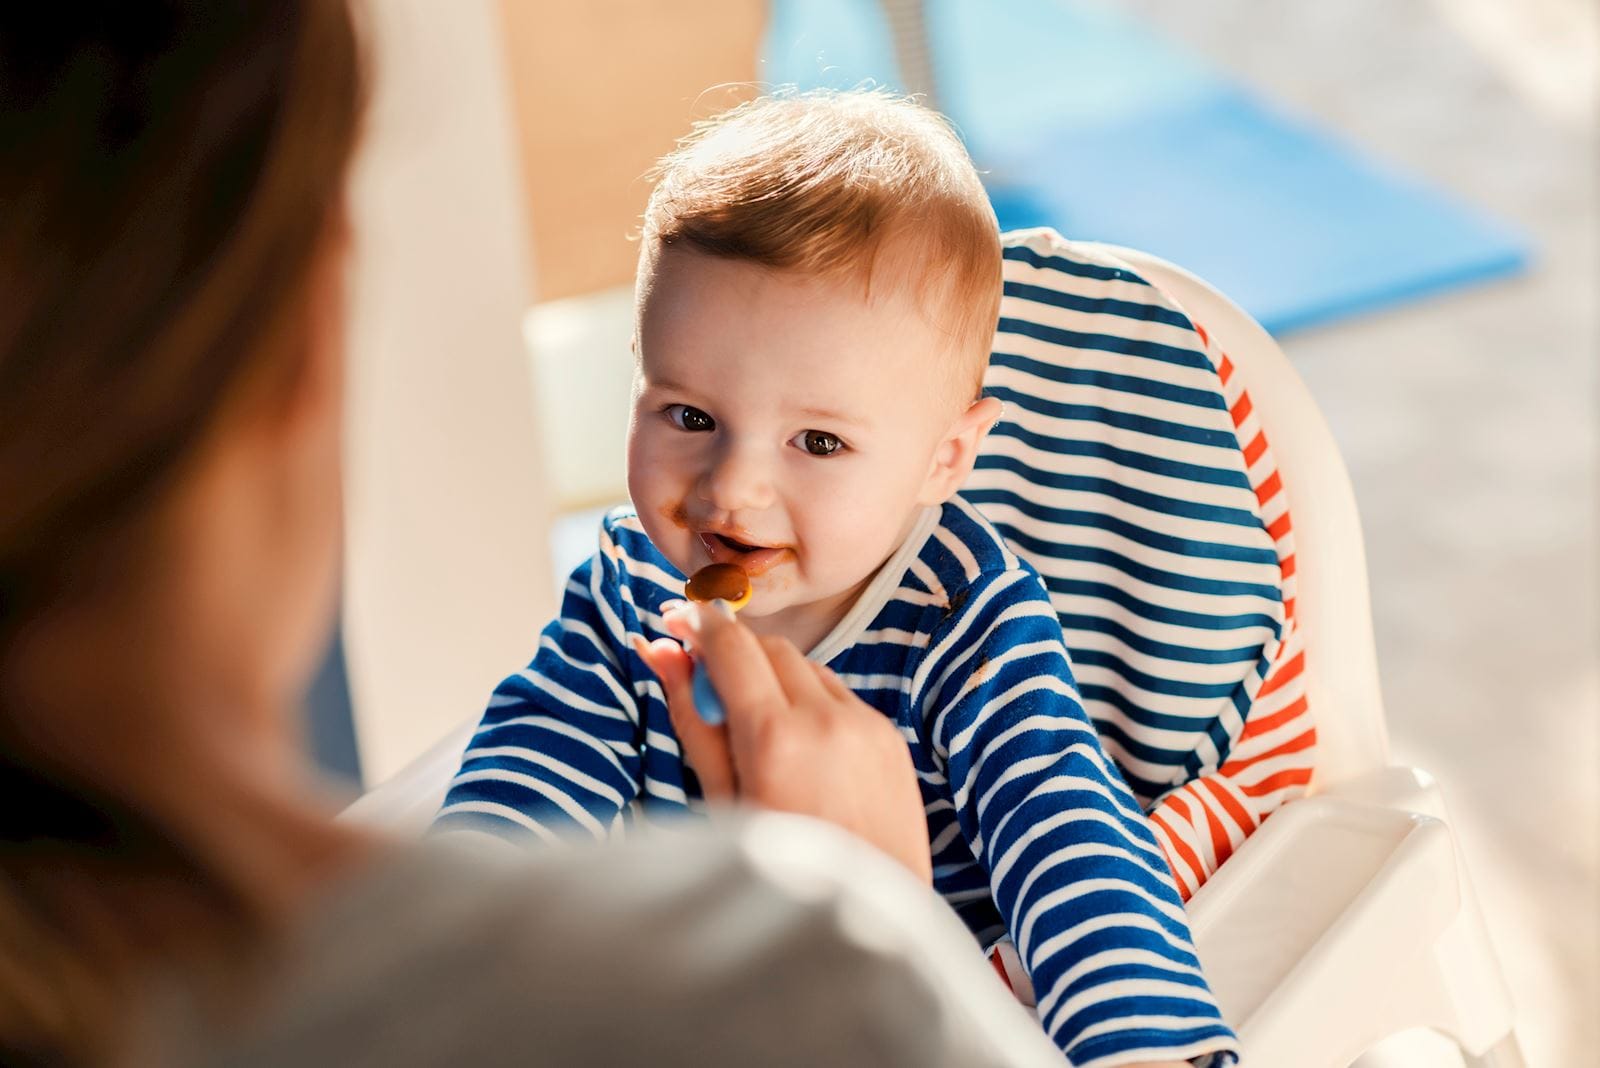 Baby eating food from a spoon